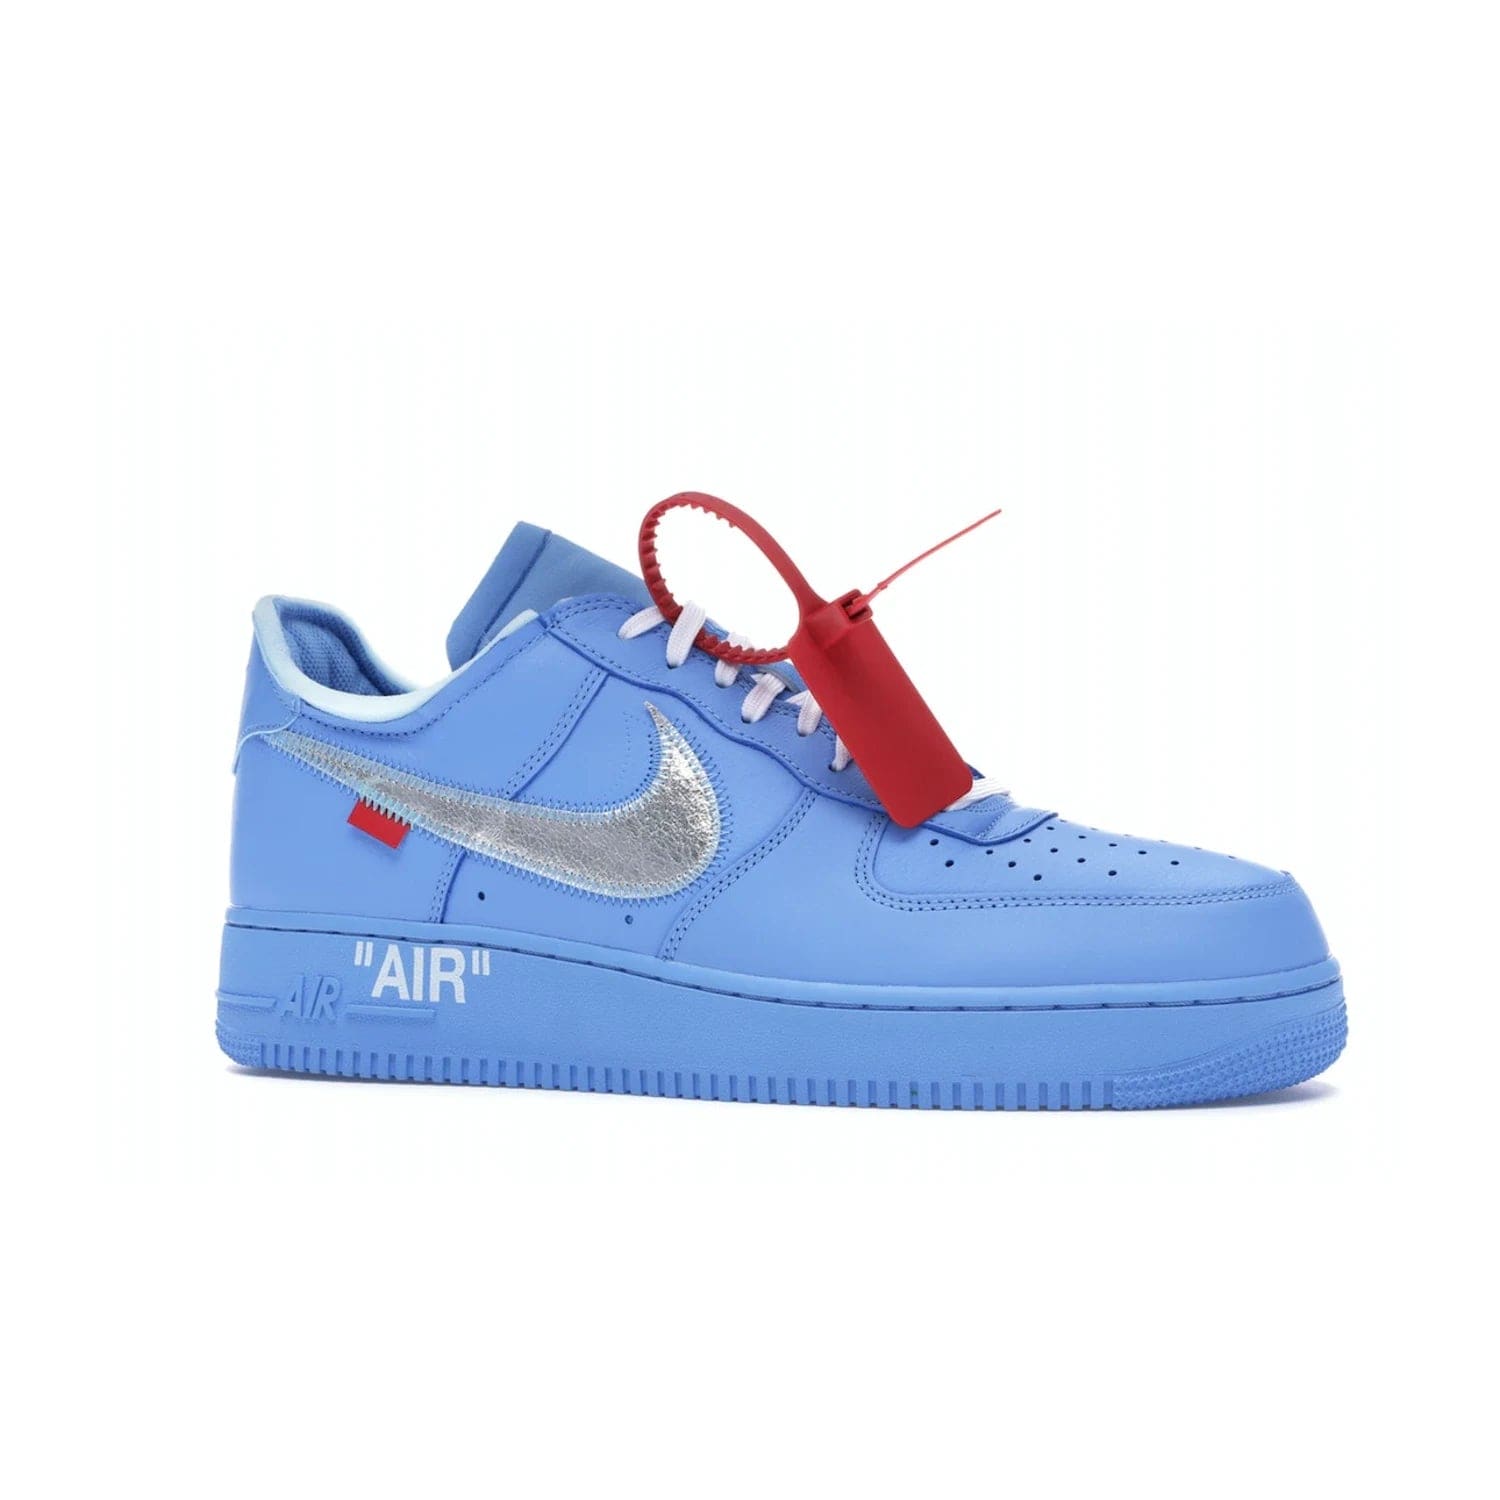 Nike Air Force 1 Low Off-White MCA University Blue - Image 3 - Only at www.BallersClubKickz.com - Virgil Abloh's Air Force 1 Low Off-White MCA University Blue: Features University Blue leather and midsole, reflective silver Nike Swoosh, red zip tie, white laces, and iconic Off-White™ branding. A must-have for any Virgil Abloh enthusiast.